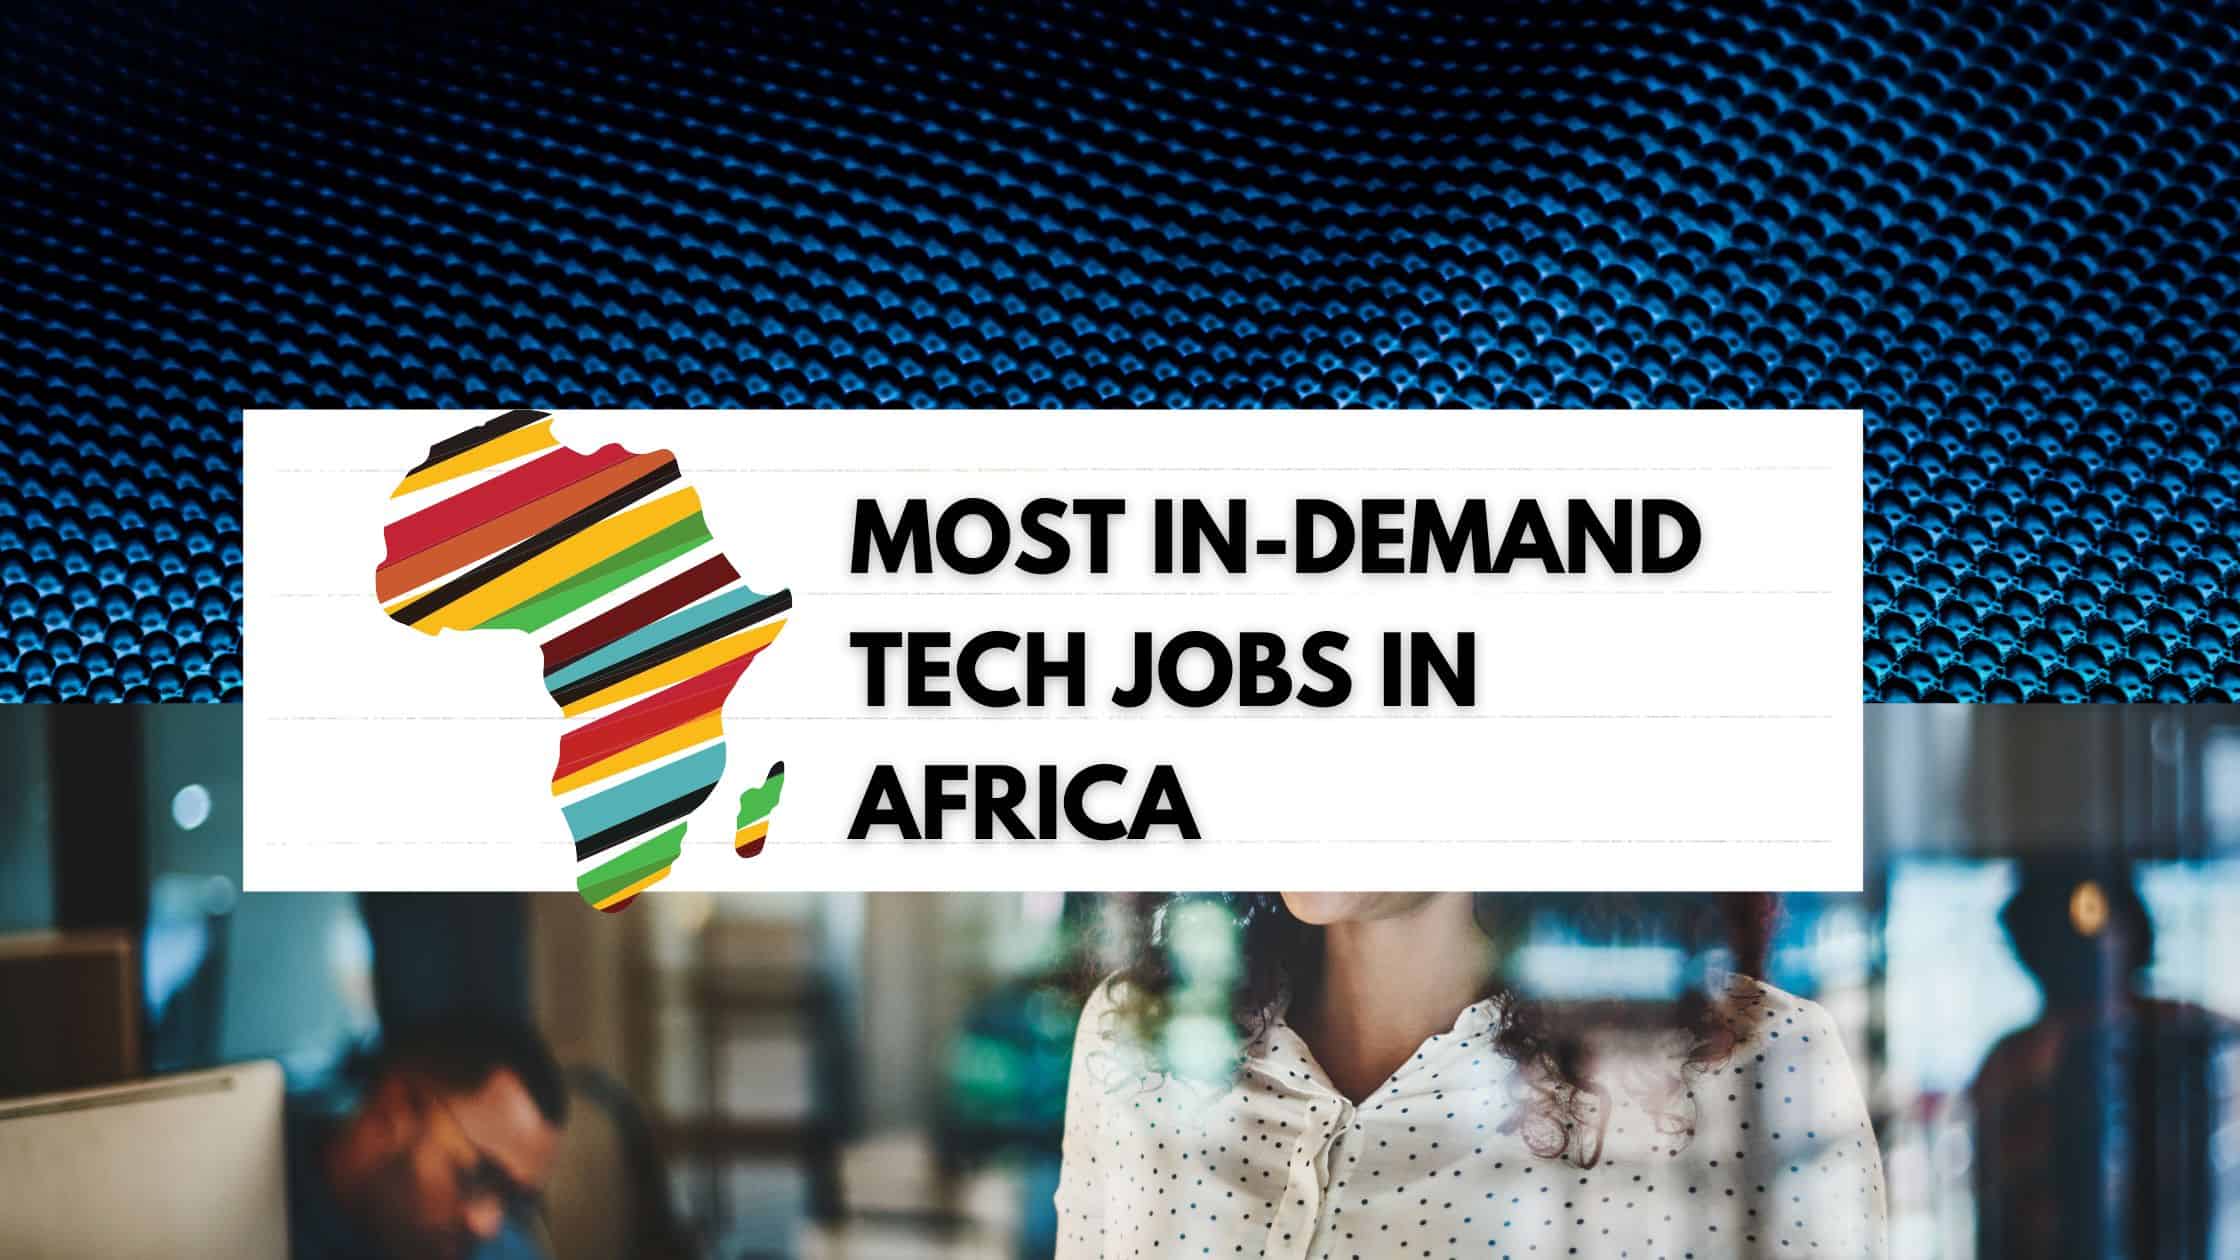 Most in-demand Tech jobs in Africa